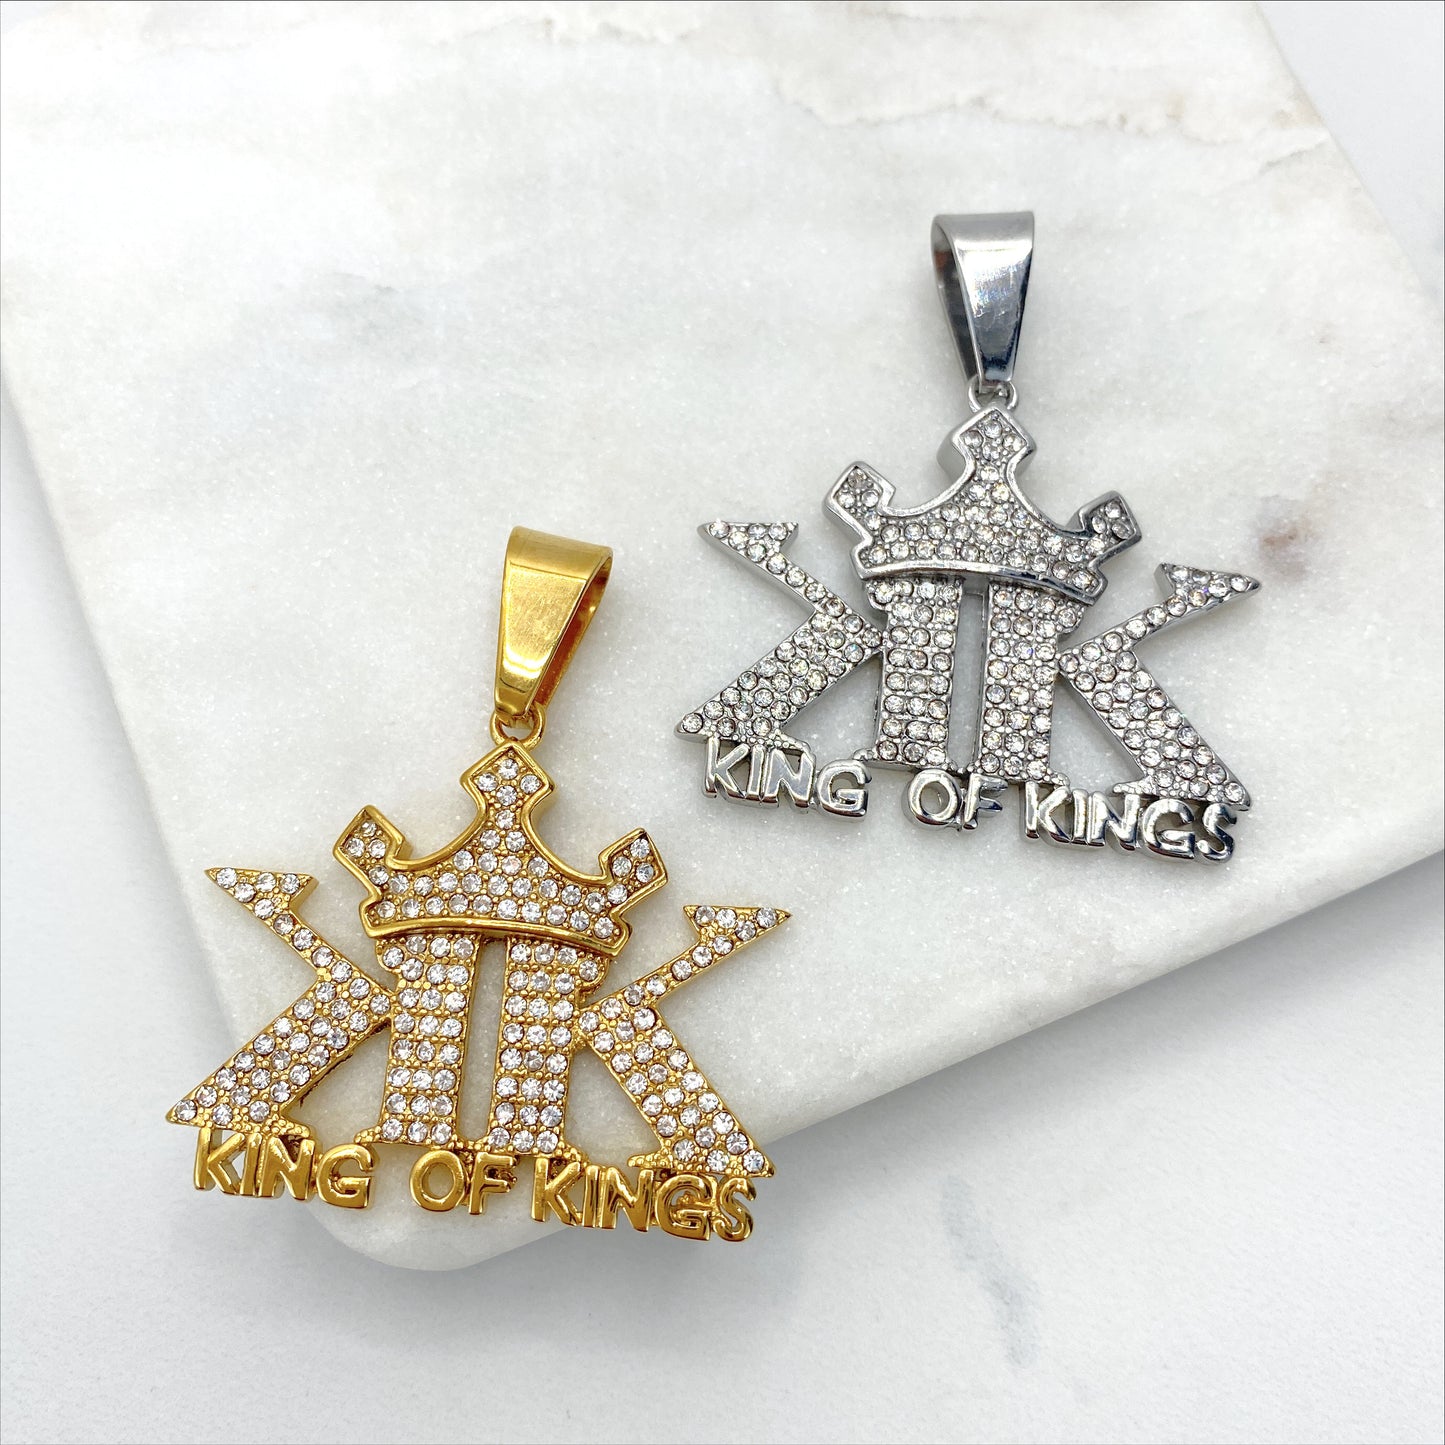 Stainless Steal, Cubic Zirconia ''King of Kings'' KK Charms Pendant, Gold or Silver, Wholesale Jewelry Making Supplies